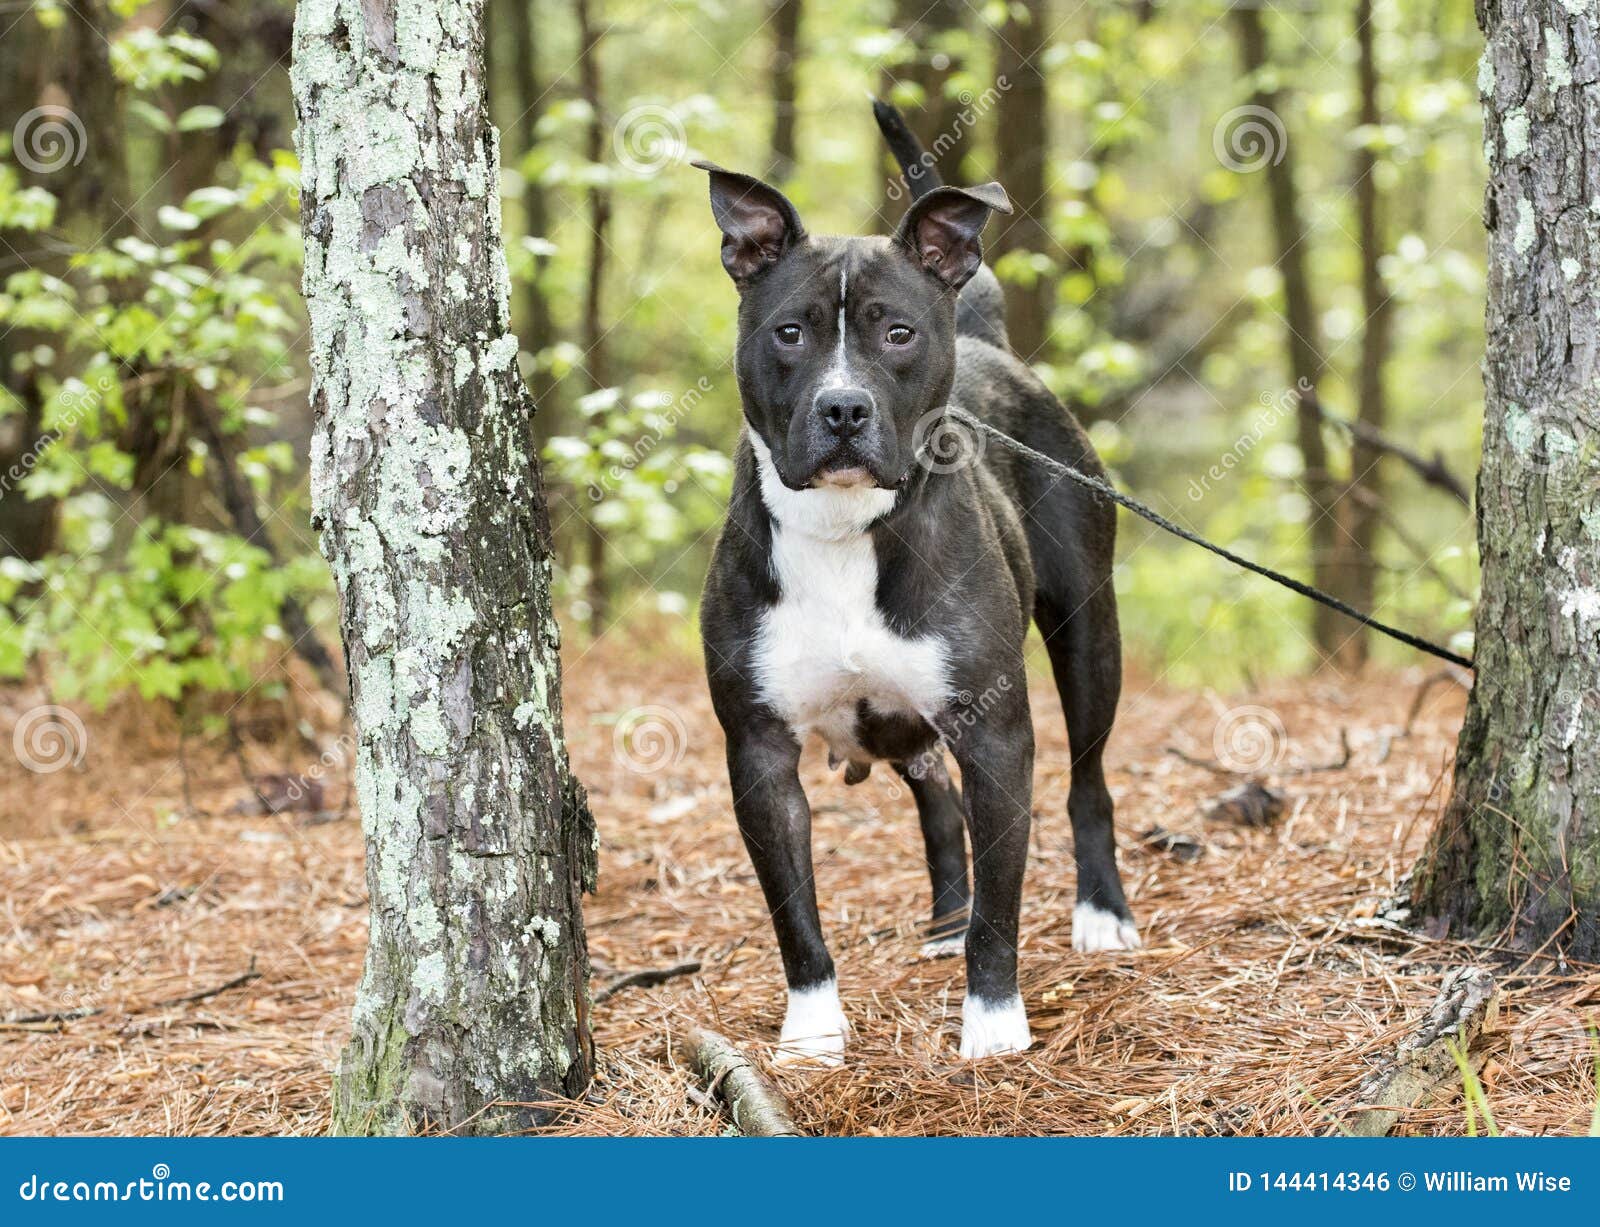 Black And White American Pit Bull Terrier Dog Erect Ears Stock Photo Image Of Rescue Humane 144414346